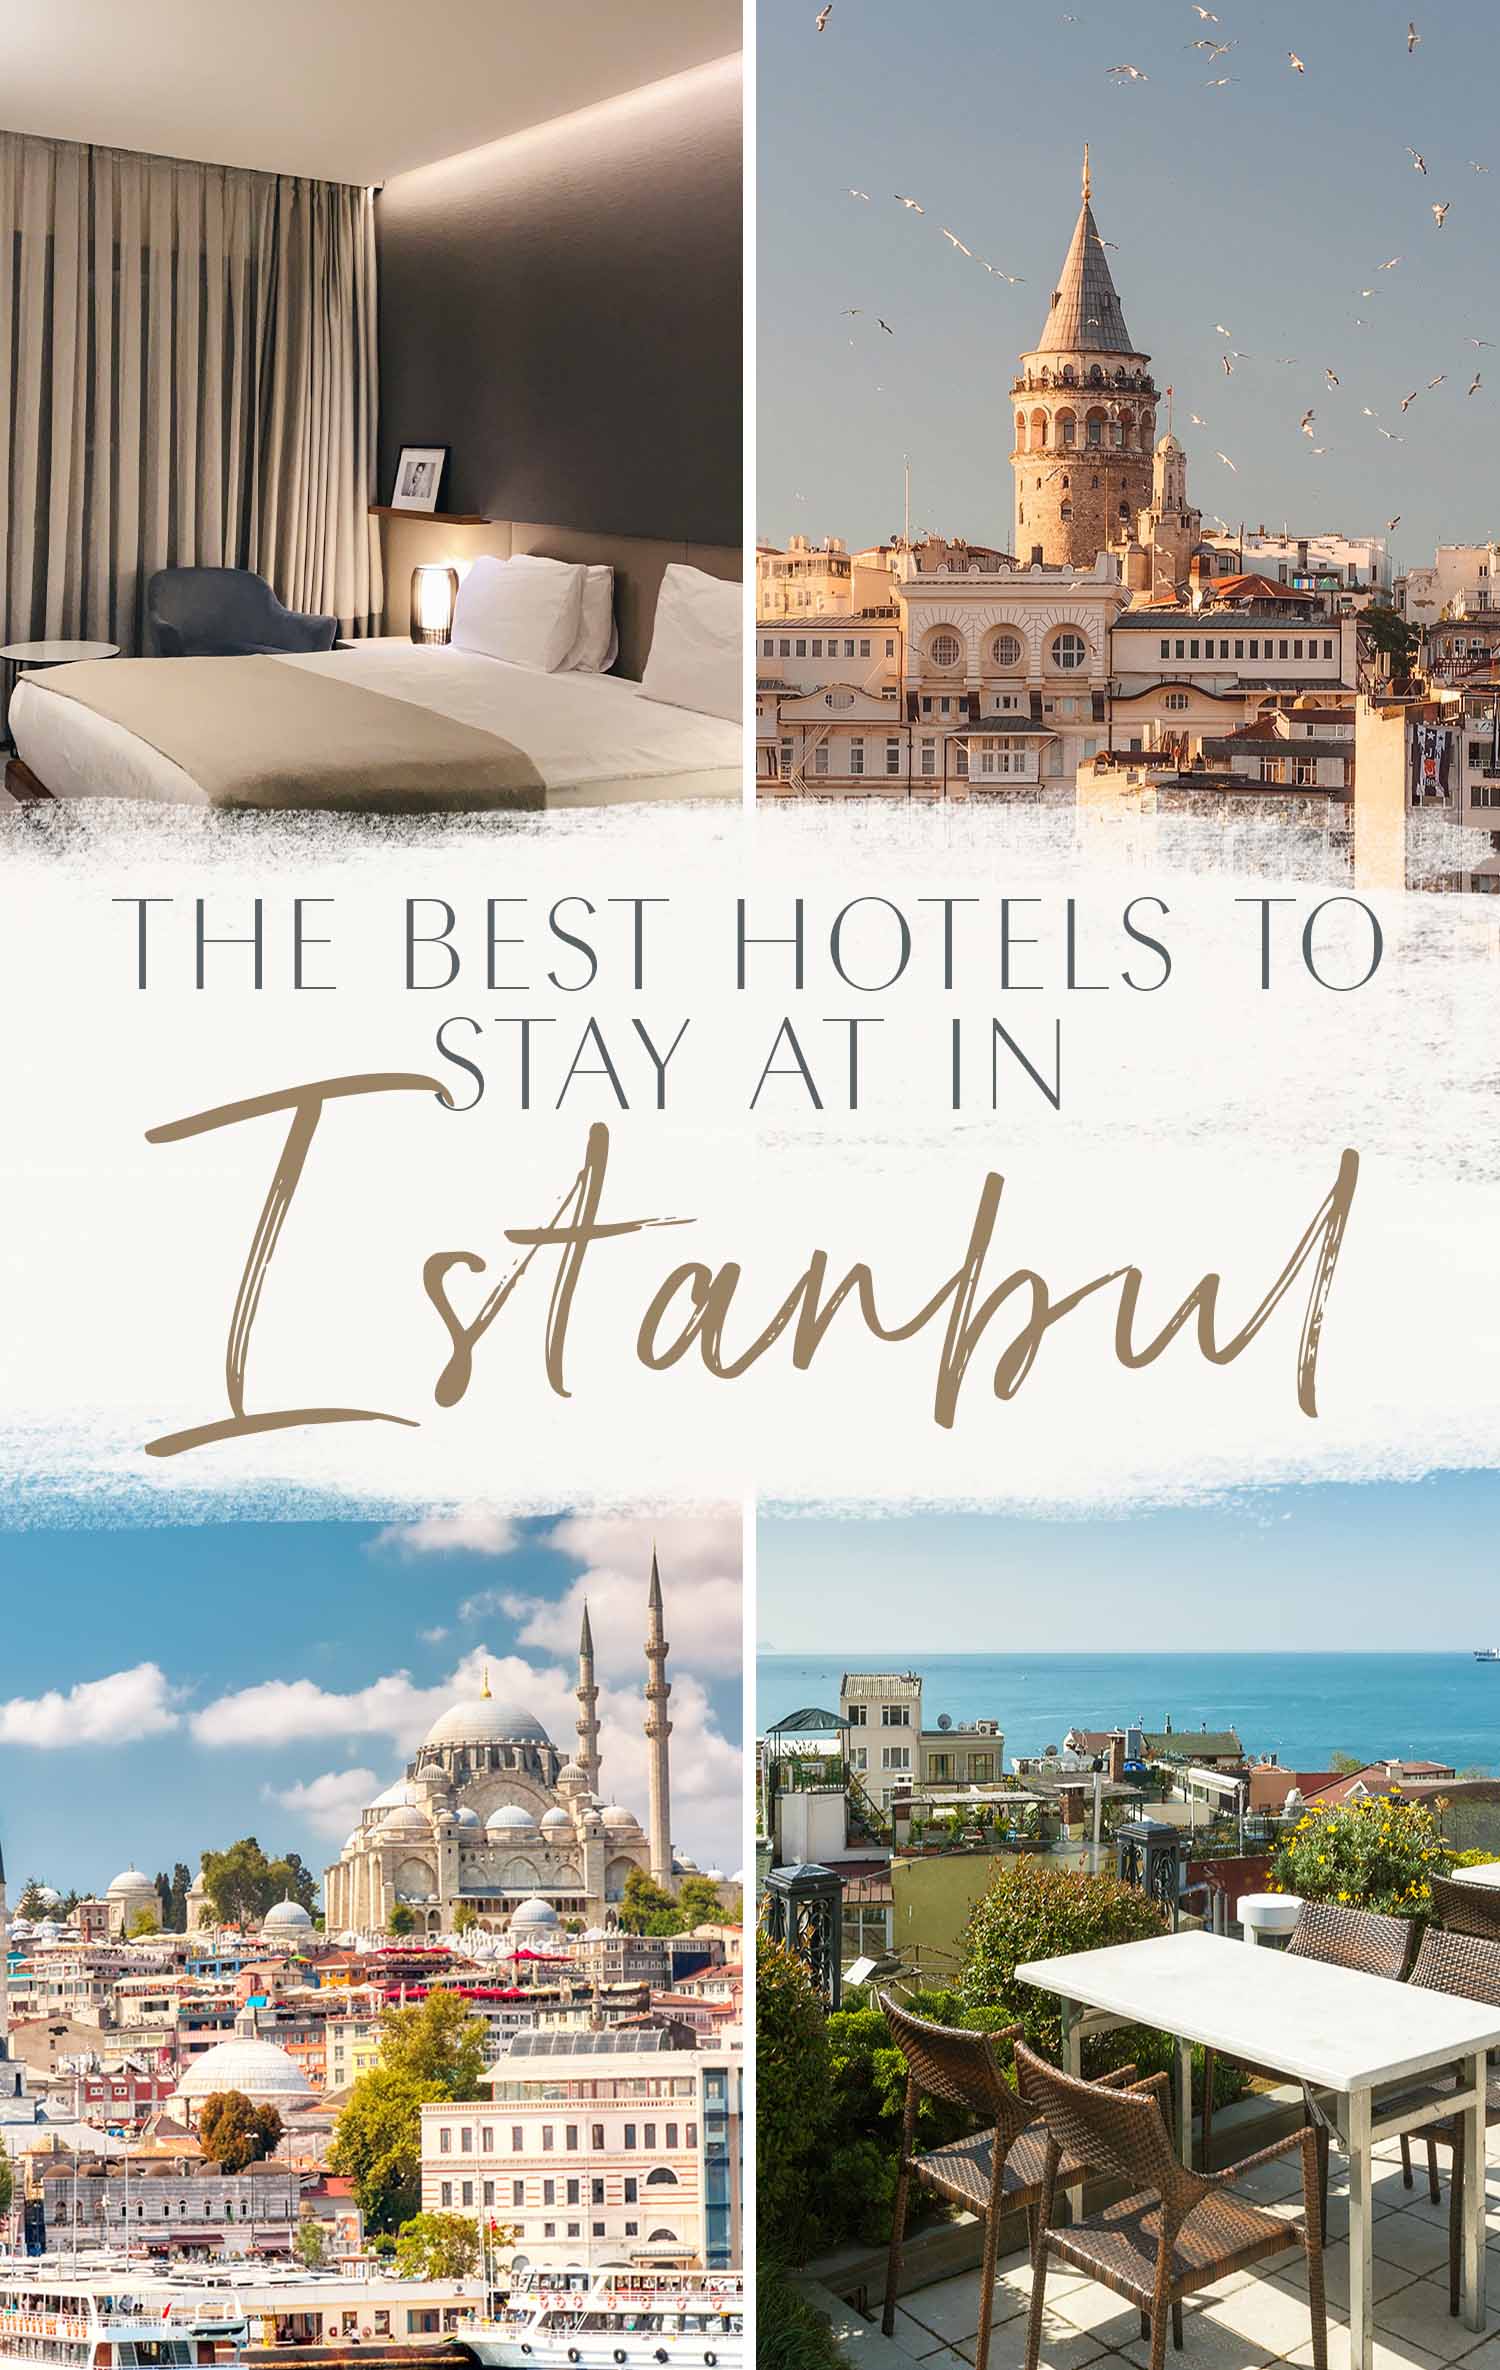 You are currently viewing The Best Hotels to Stay at in Istanbul